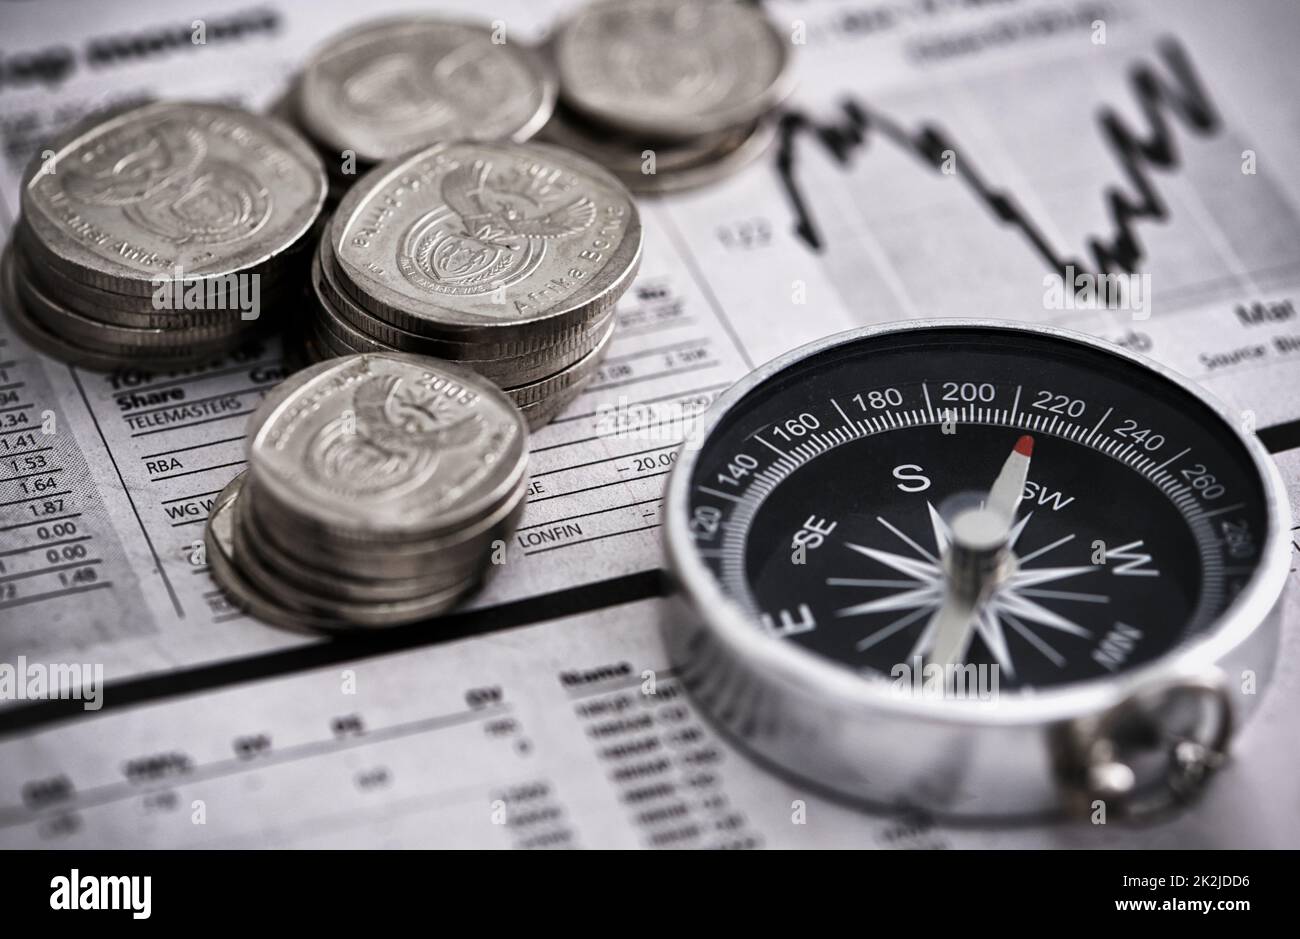 Leading the way to financial success. Studio shot of coins and a compass on the business section of a newspaper. Stock Photo